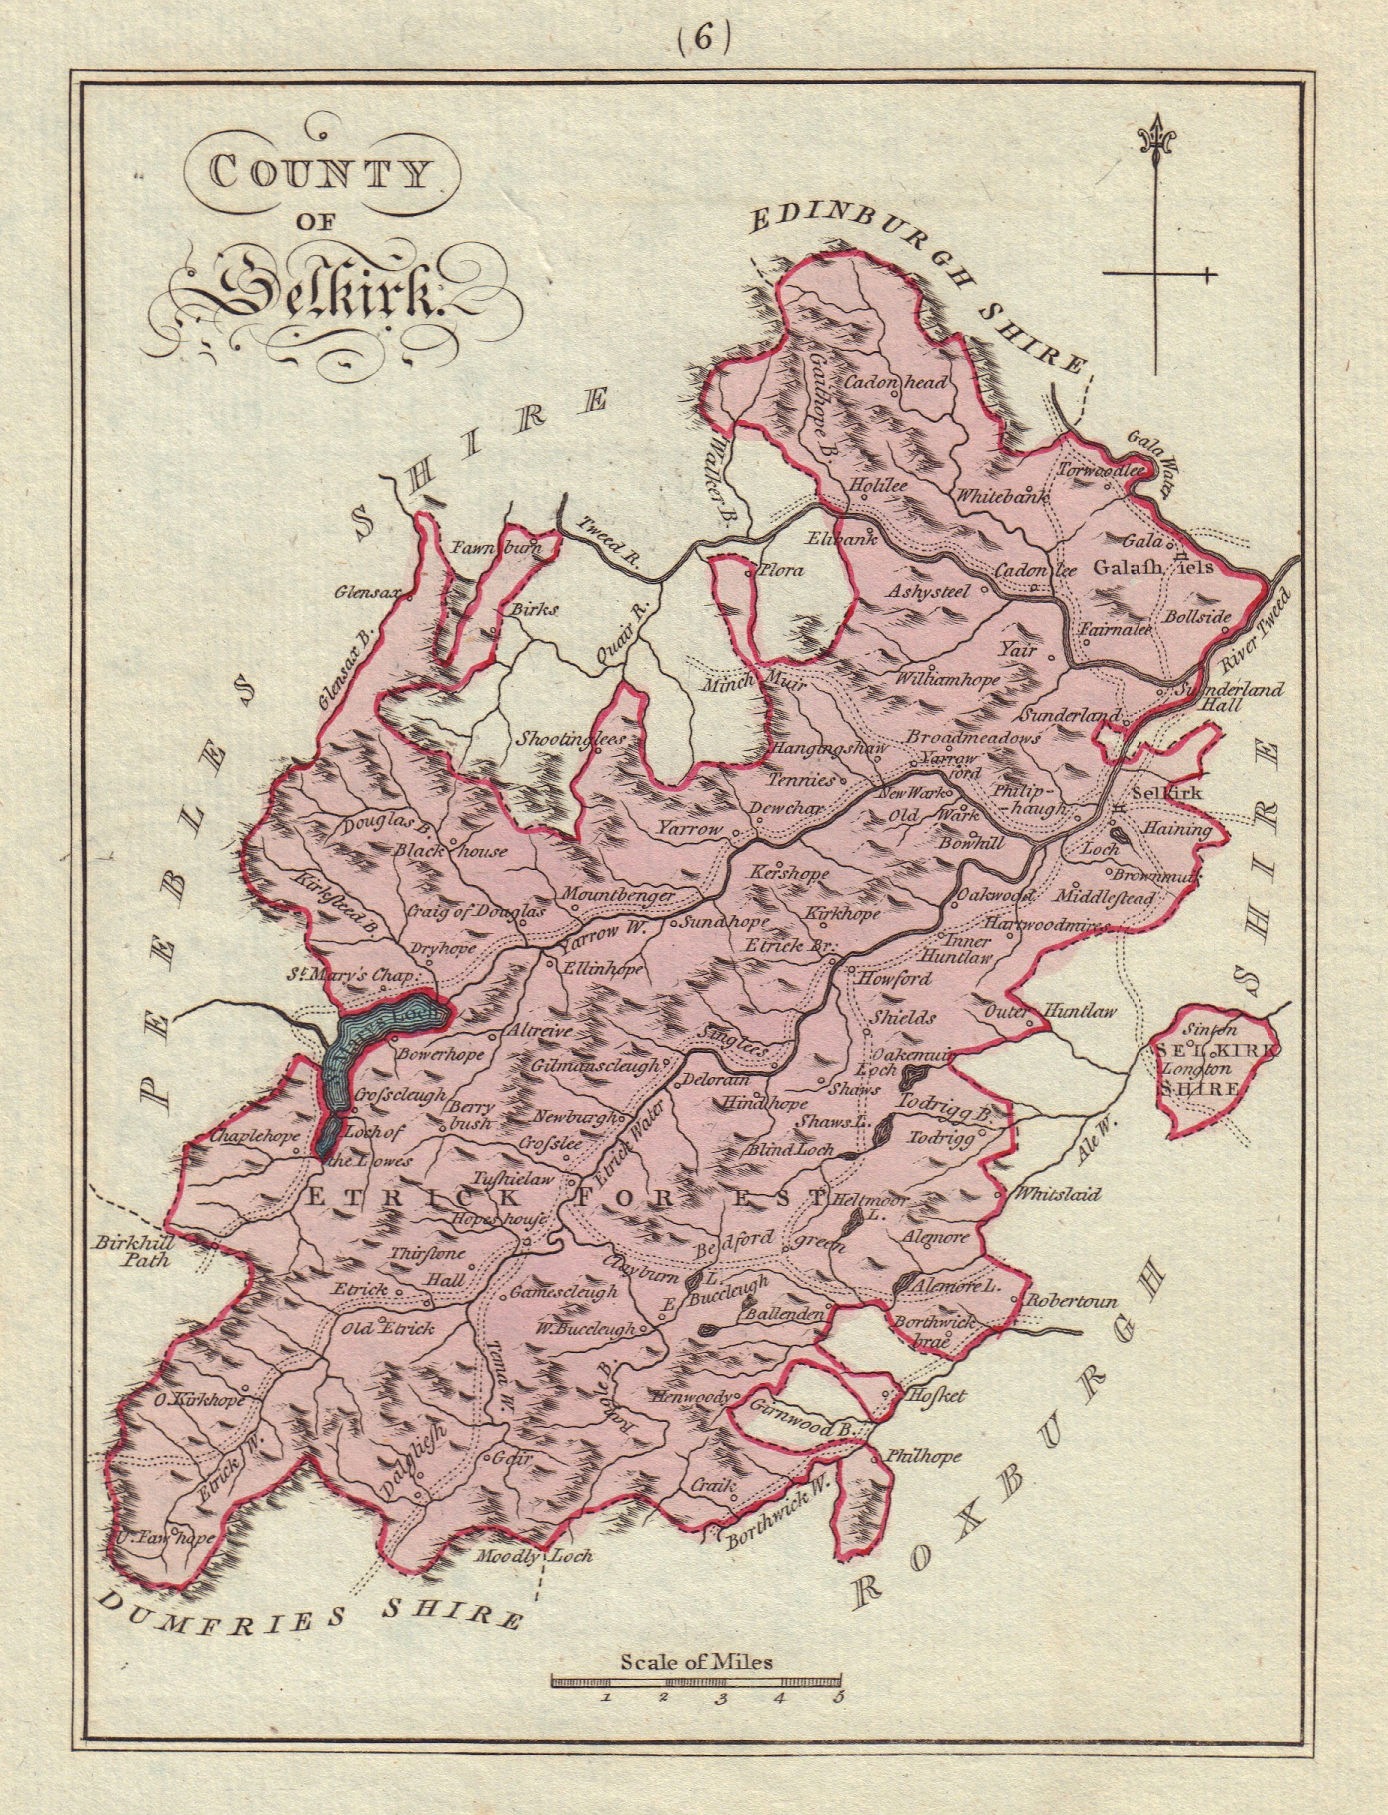 County of Selkirk. Selkirkshire. SAYER / ARMSTRONG 1794 old antique map chart